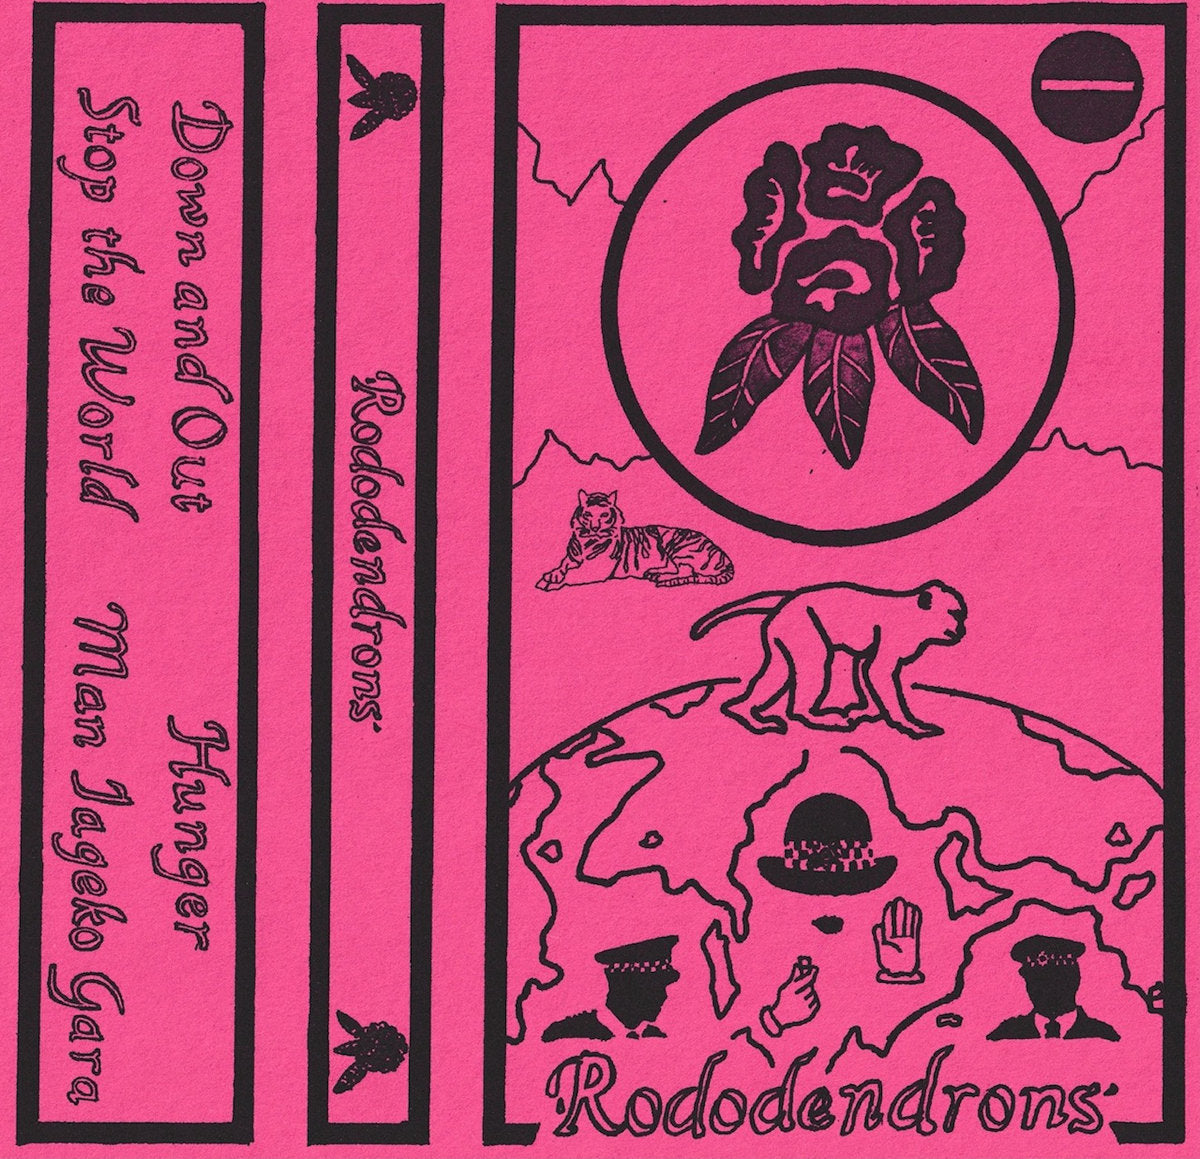 RODODENDRONS - DEMO Cassette Tape